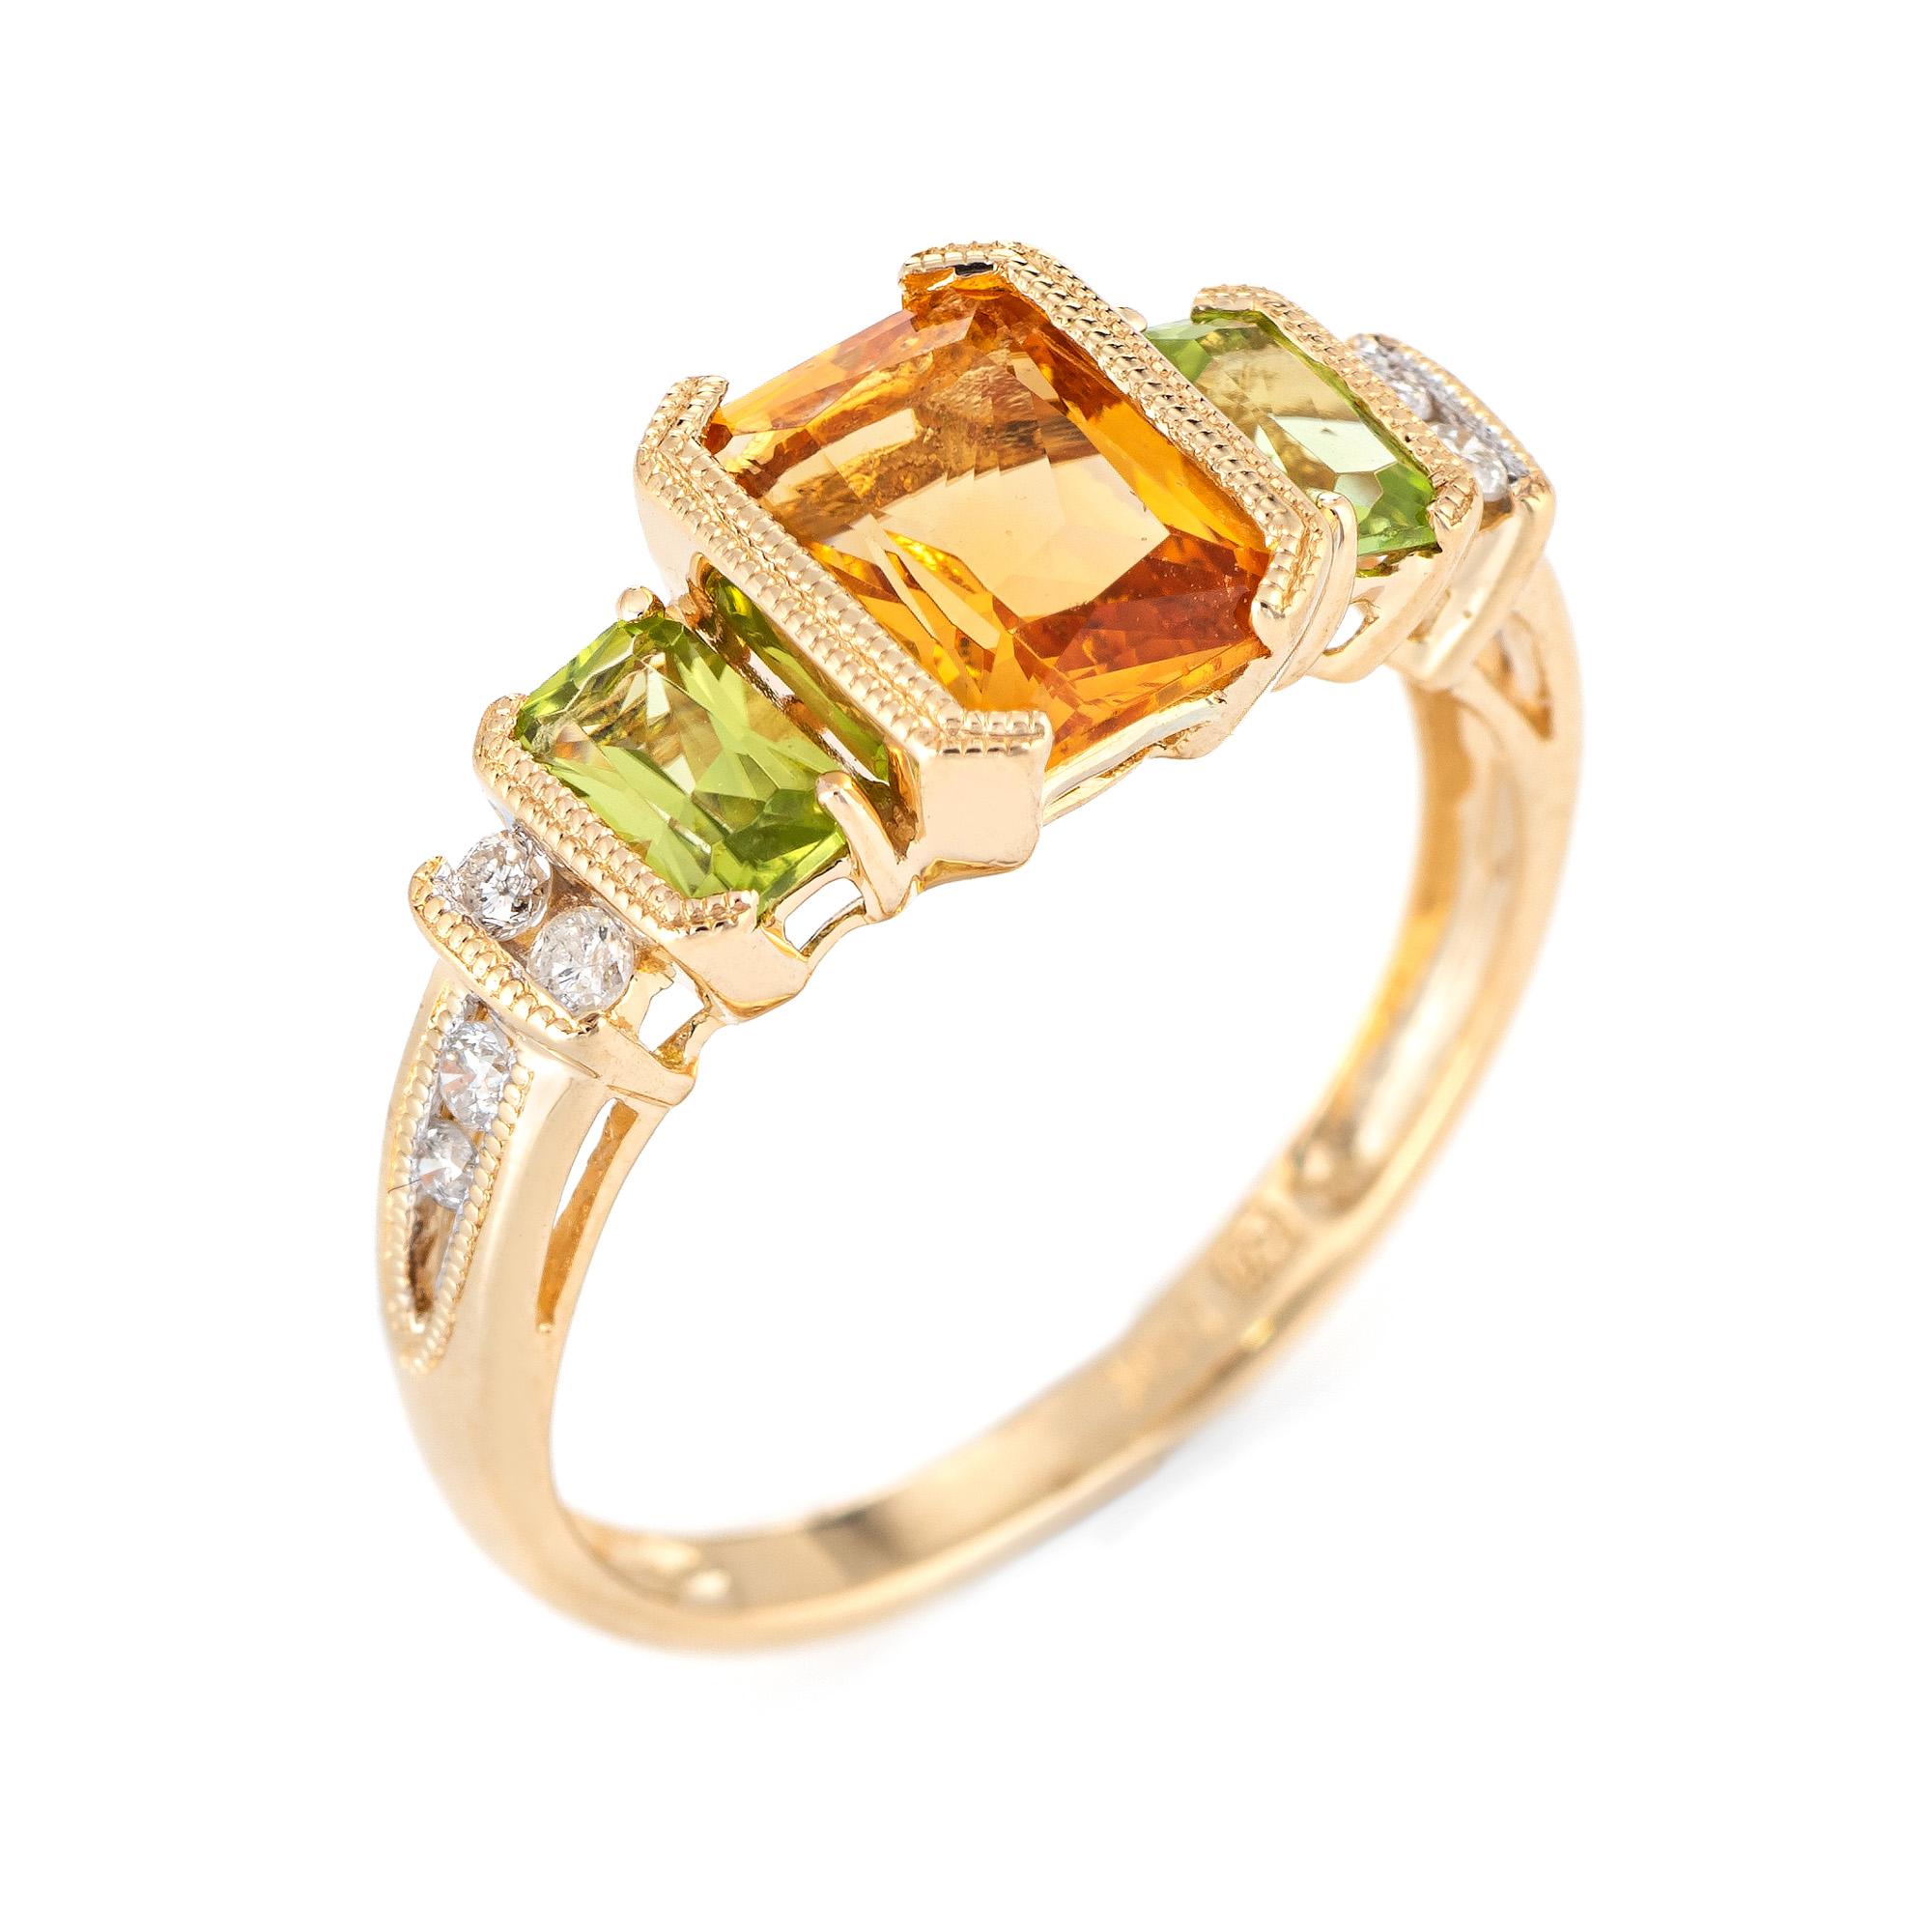 Stylish mixed gemstone ring set with peridot, citrine & diamonds in 14 karat yellow gold. 

Citrine measures 8mm x 5mm and is estimated at 1.25 carats. Peridot is estimated at 0.30 carats each (0.60 carats total estimated weight). The diamonds total